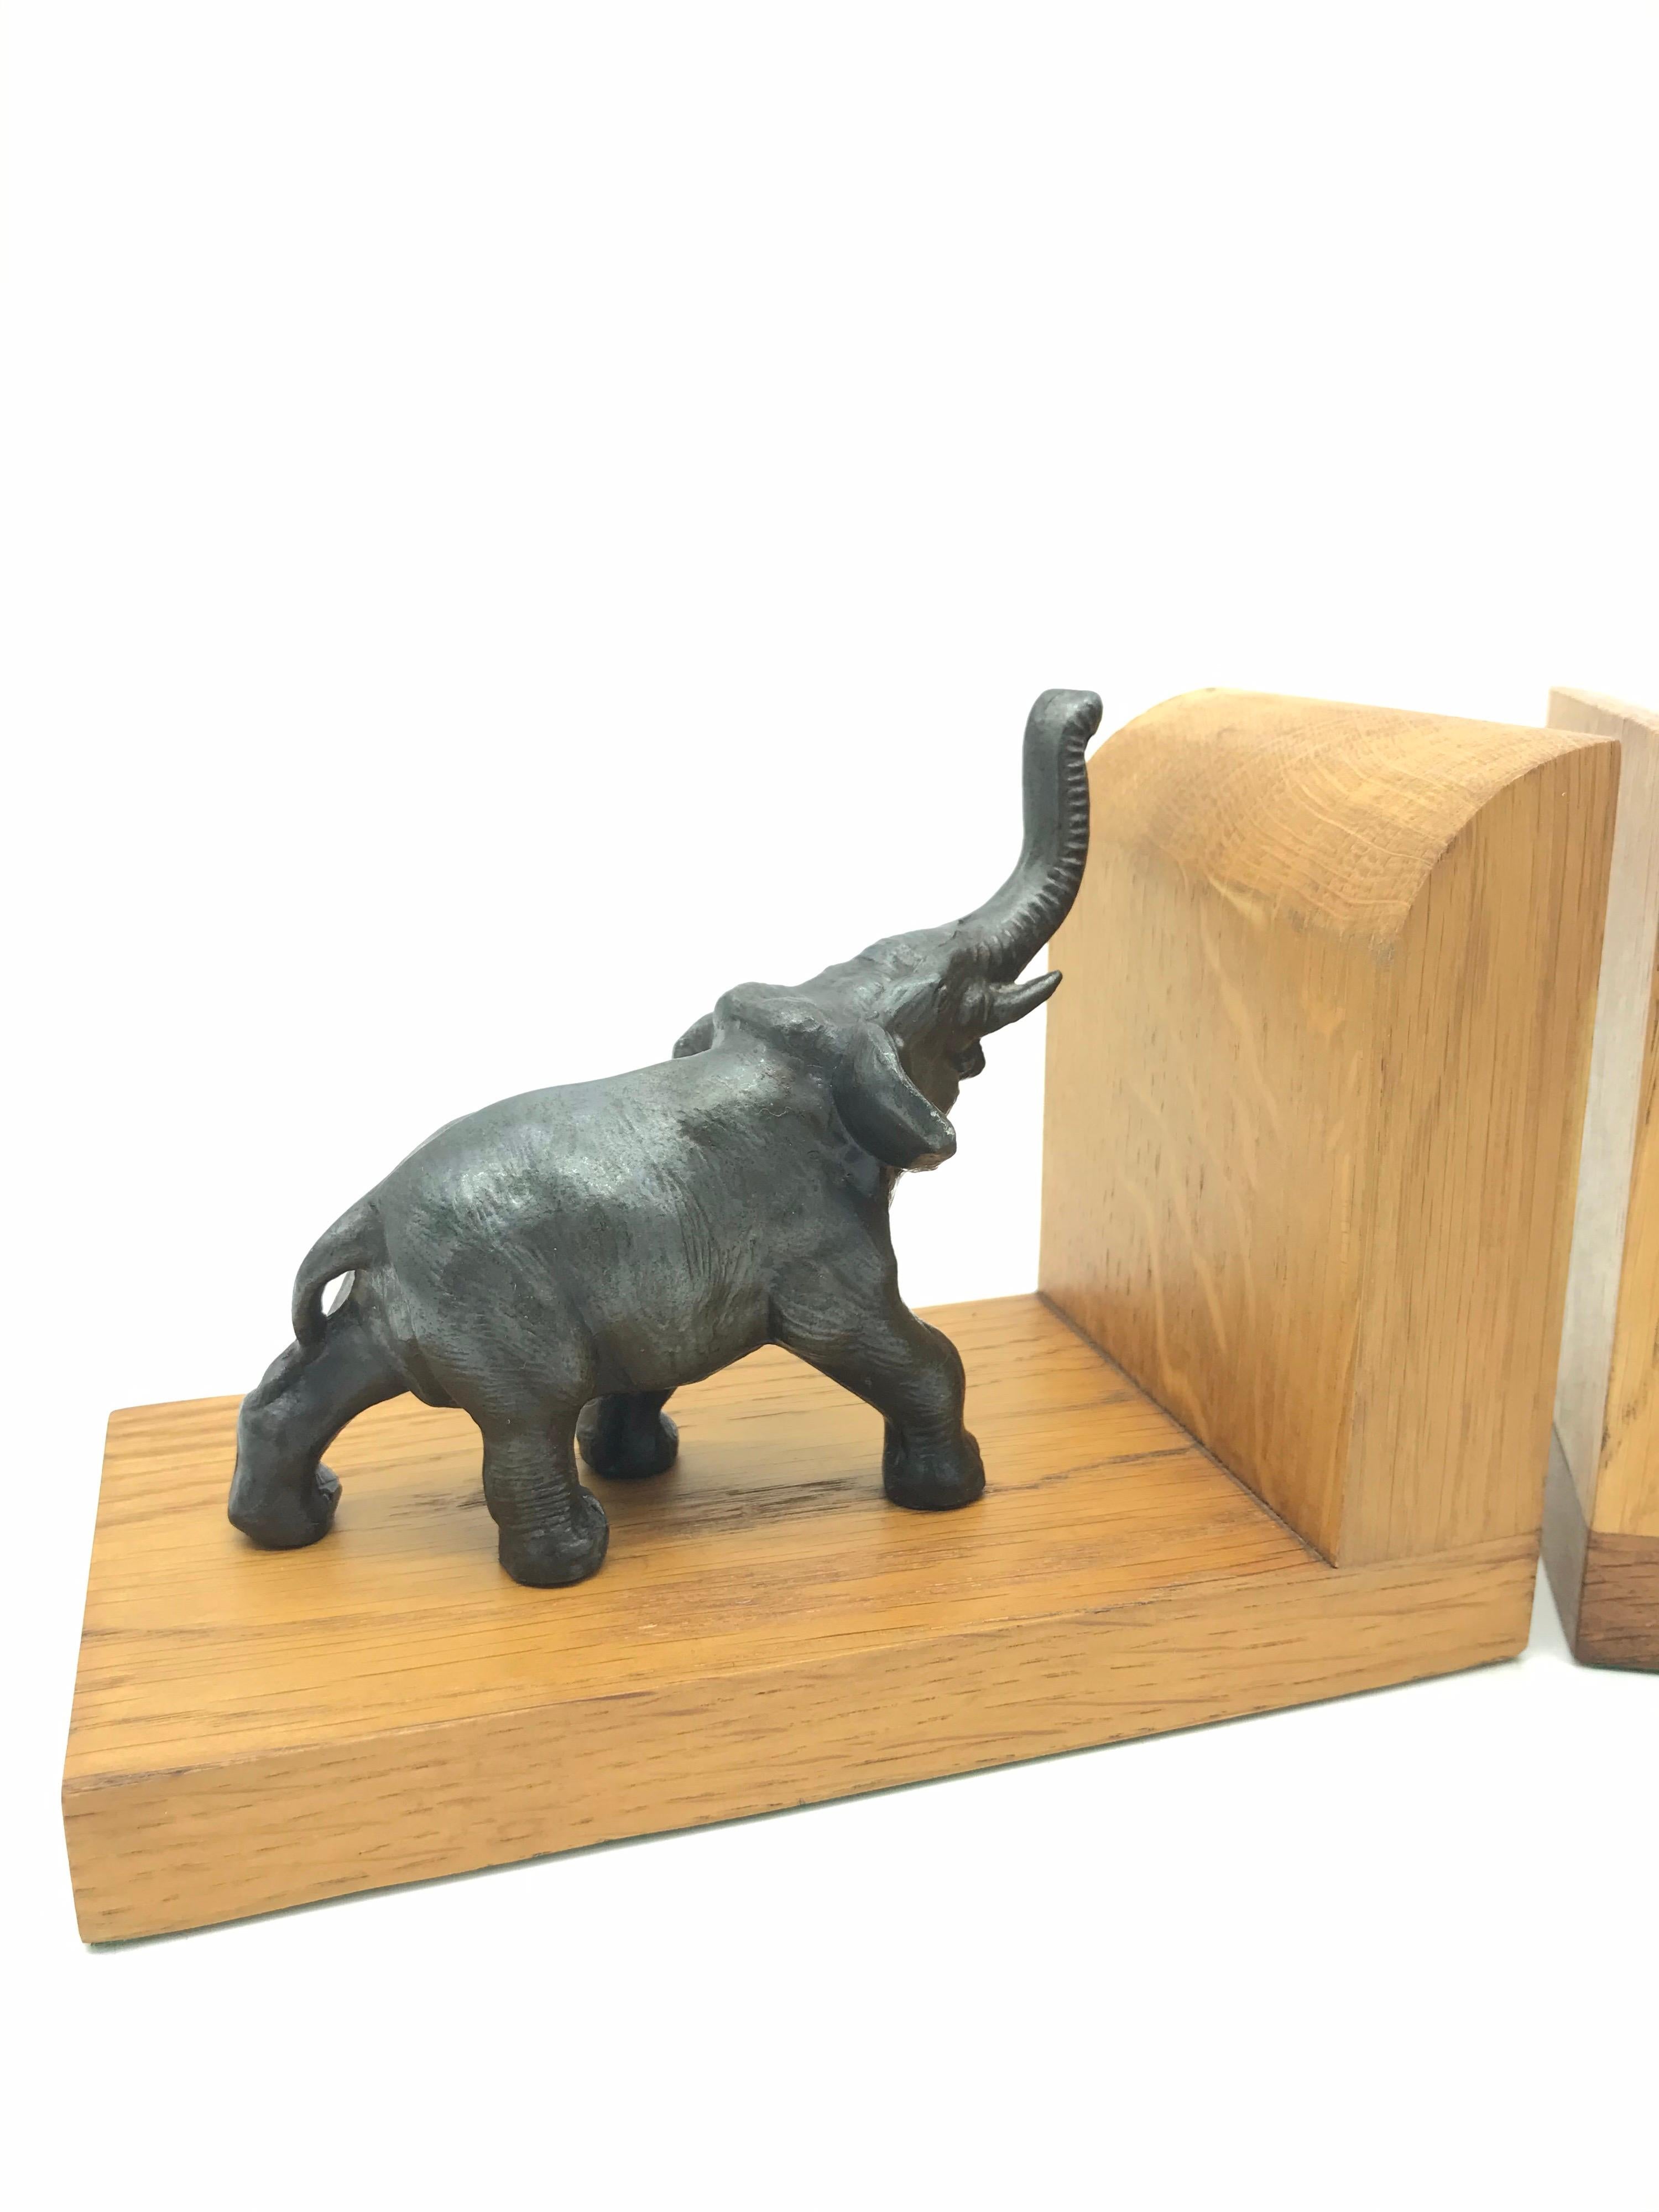 Danish Amazing Pair of Art Deco Elephant Book Ends from the 1930s